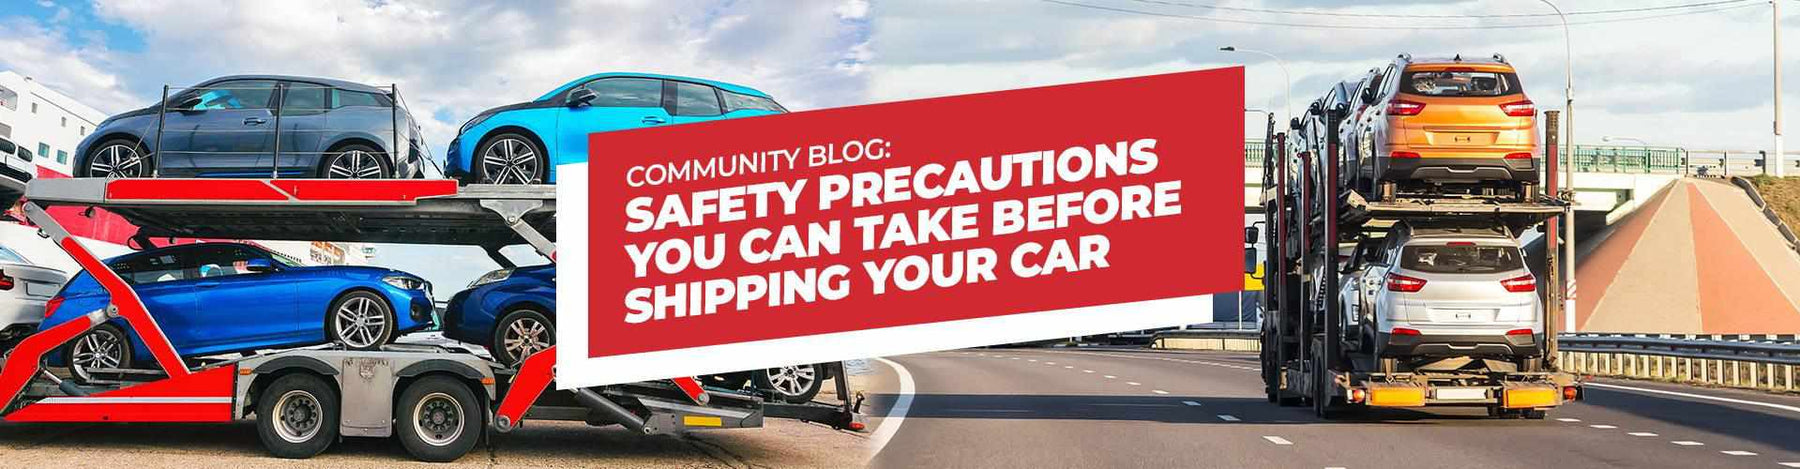 Safety Precautions You Can Take Before Shipping Your Car -  - BlackboxMyCar Canada